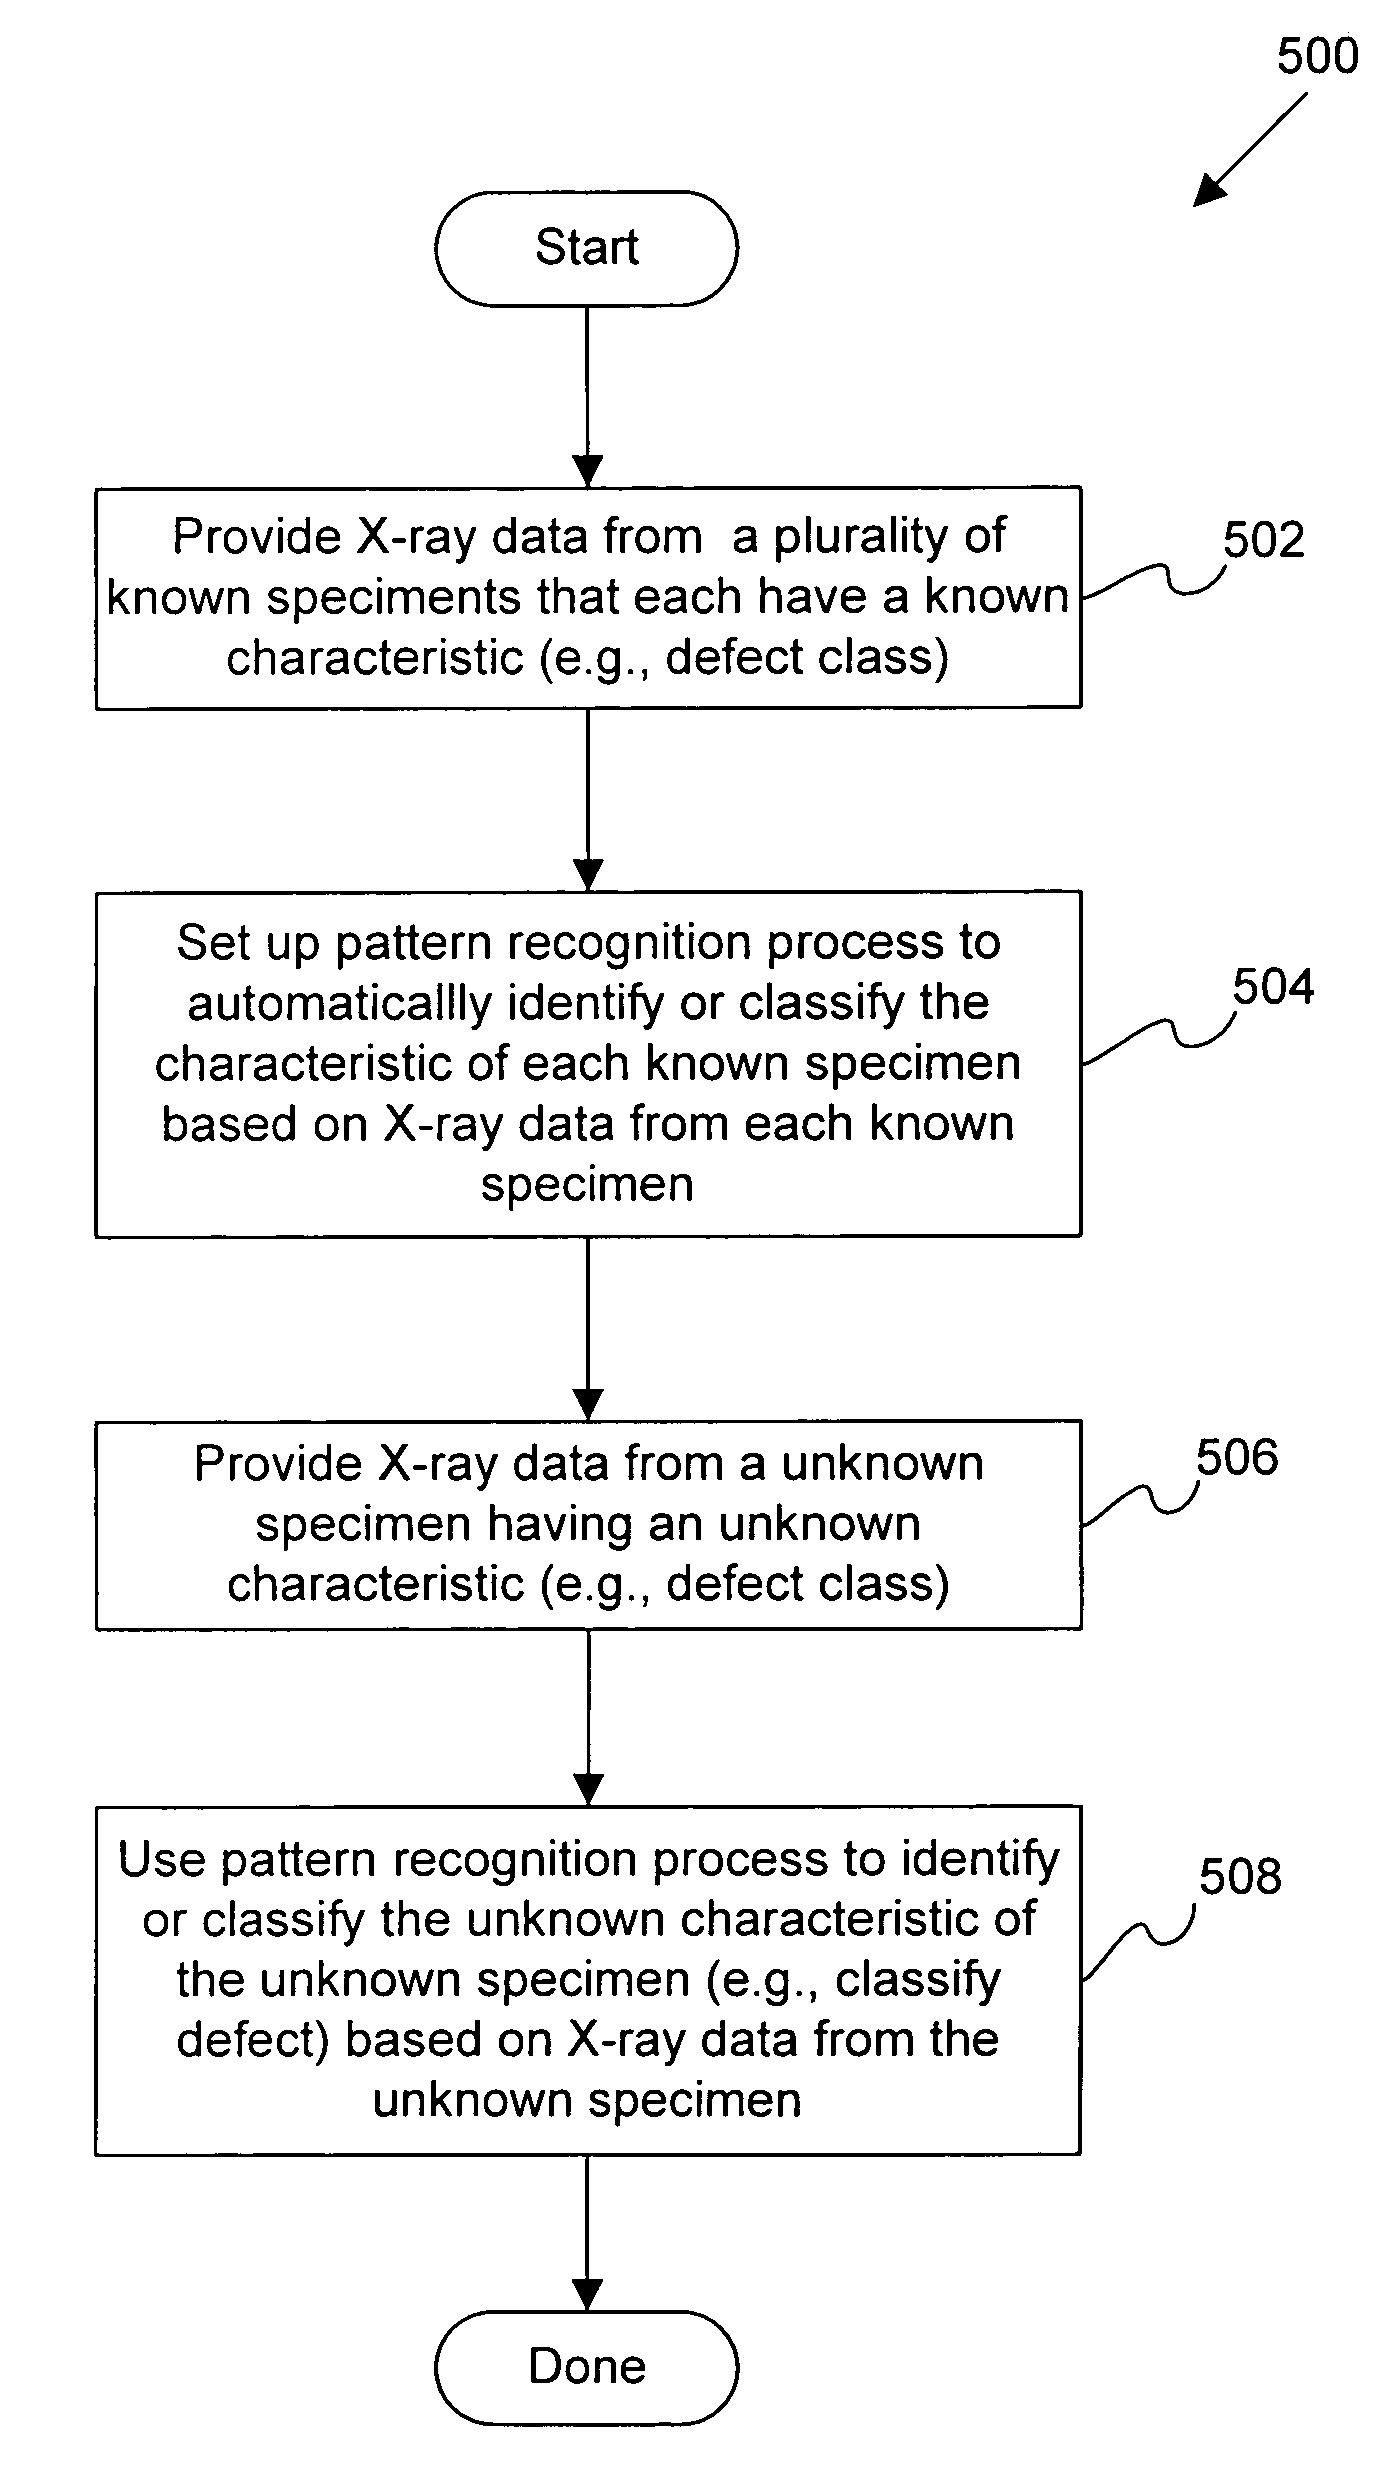 Automatic classification of defects using pattern recognition applied to X-ray spectra